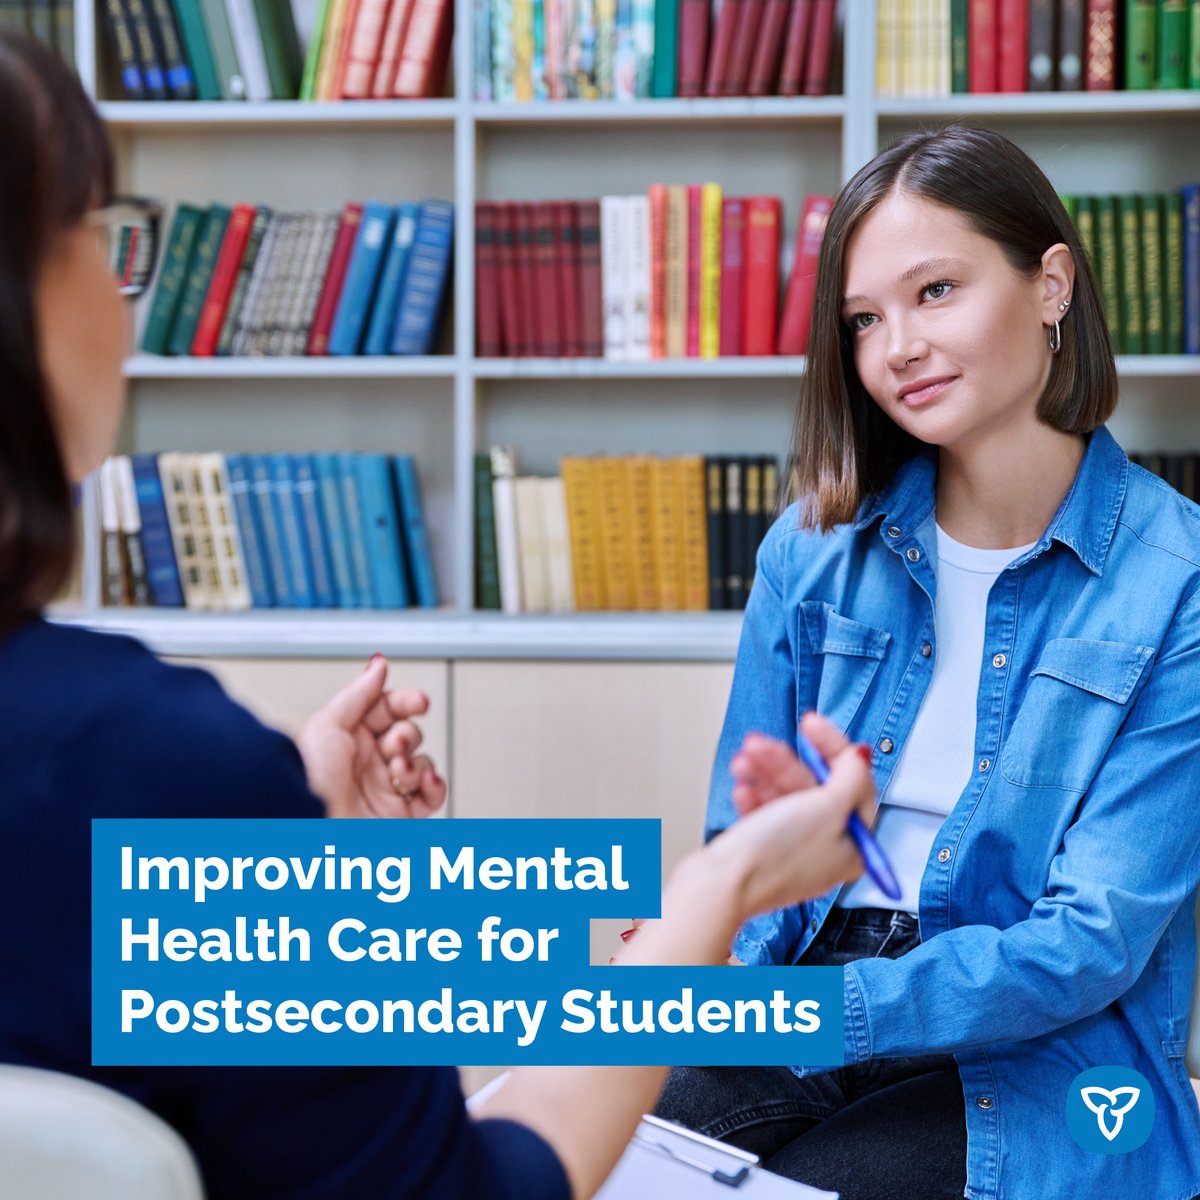 Our government is investing $5 million for student mental health supports at 10 underserved #ONpse institutions. Learn more: news.ontario.ca/en/release/100… #MentalHealthWeek